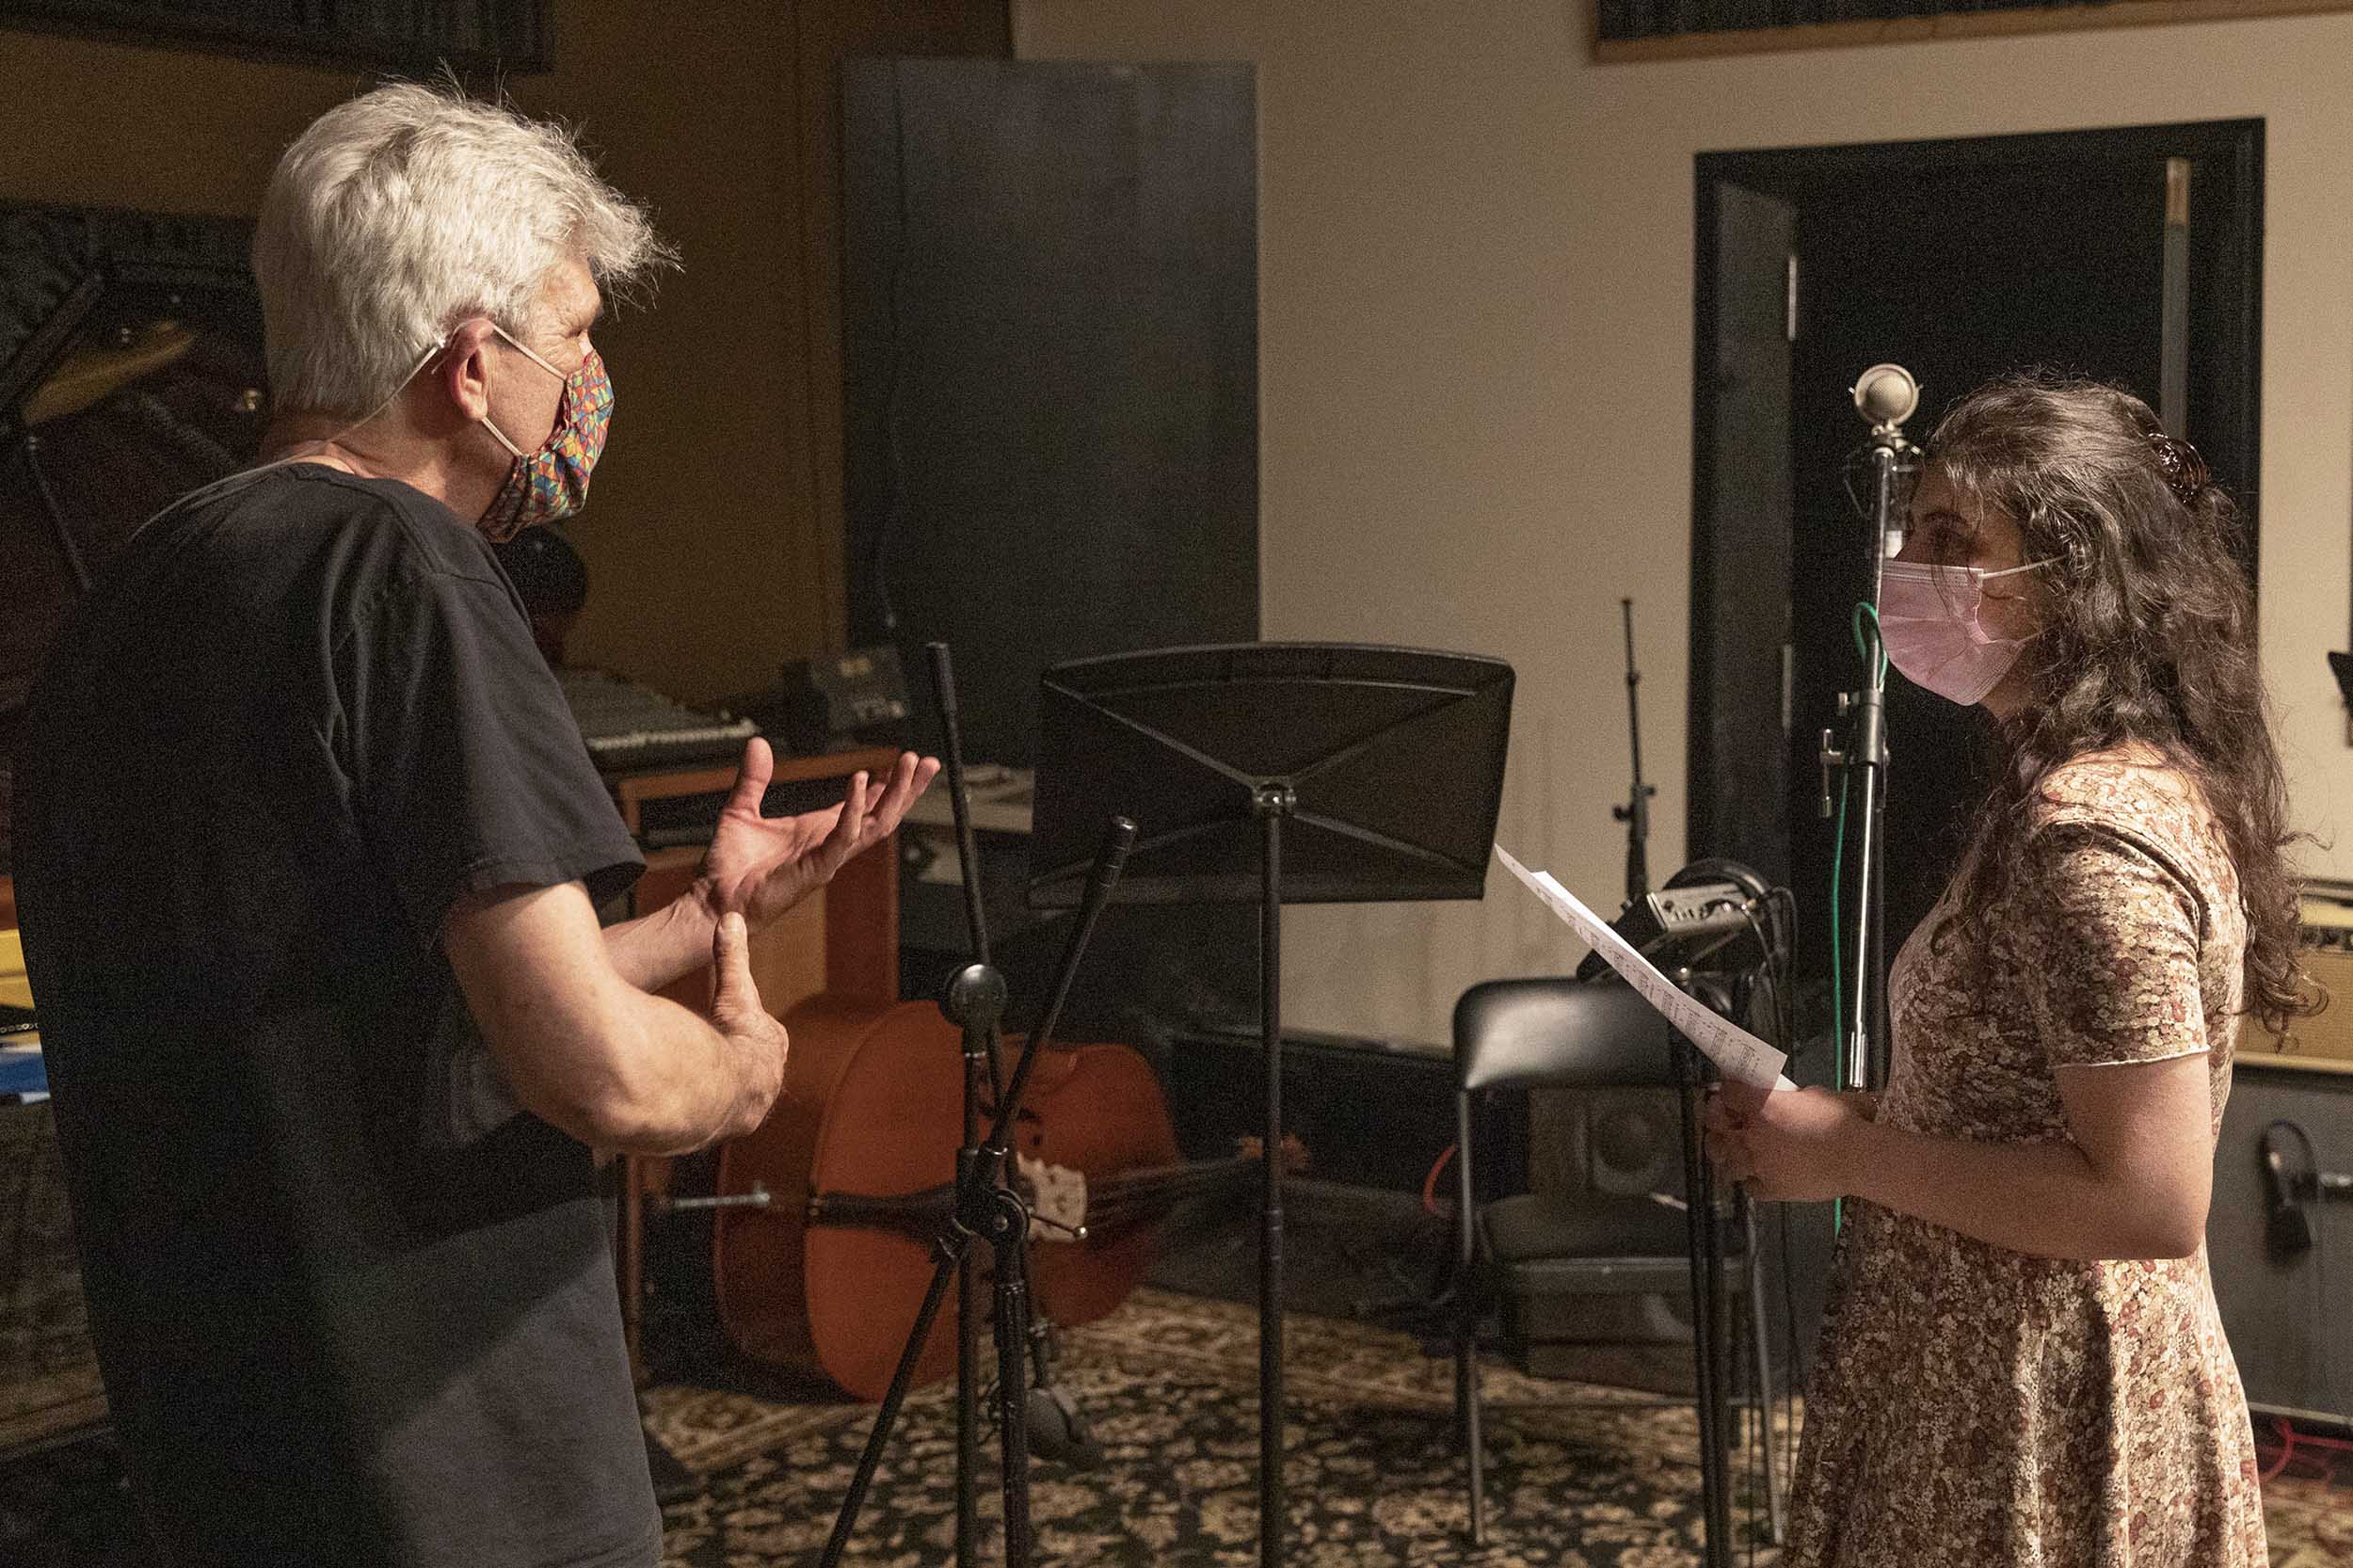 D’earth confers with singer Tina Hashemi during a session in the studio.